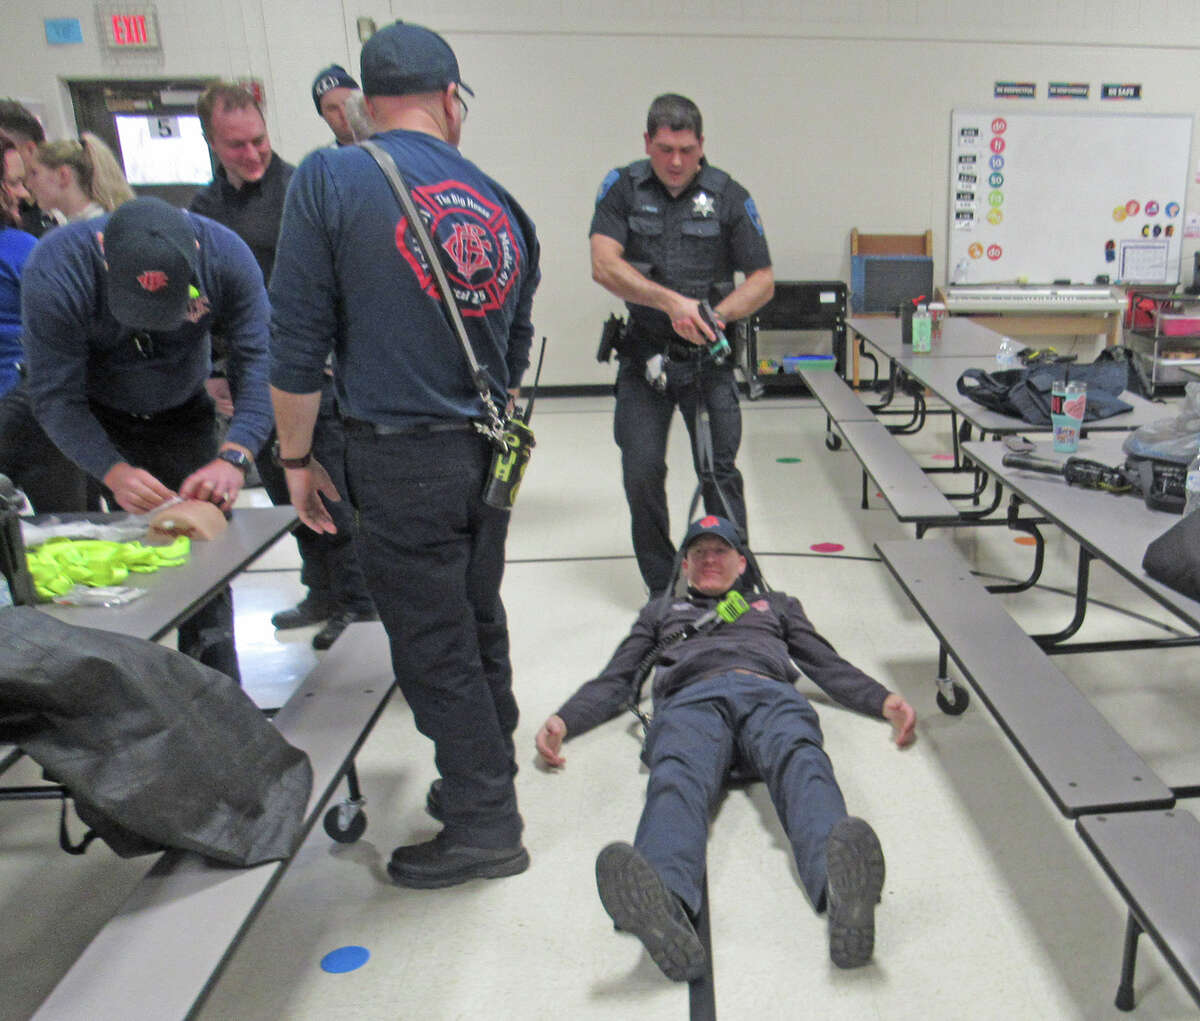 Members of the Collinsville Police Department and the Collinsville Fire Department practice how to carry and rescue a victim during an active shooter training session Thursday at Summit Elementary School in Collinsville.